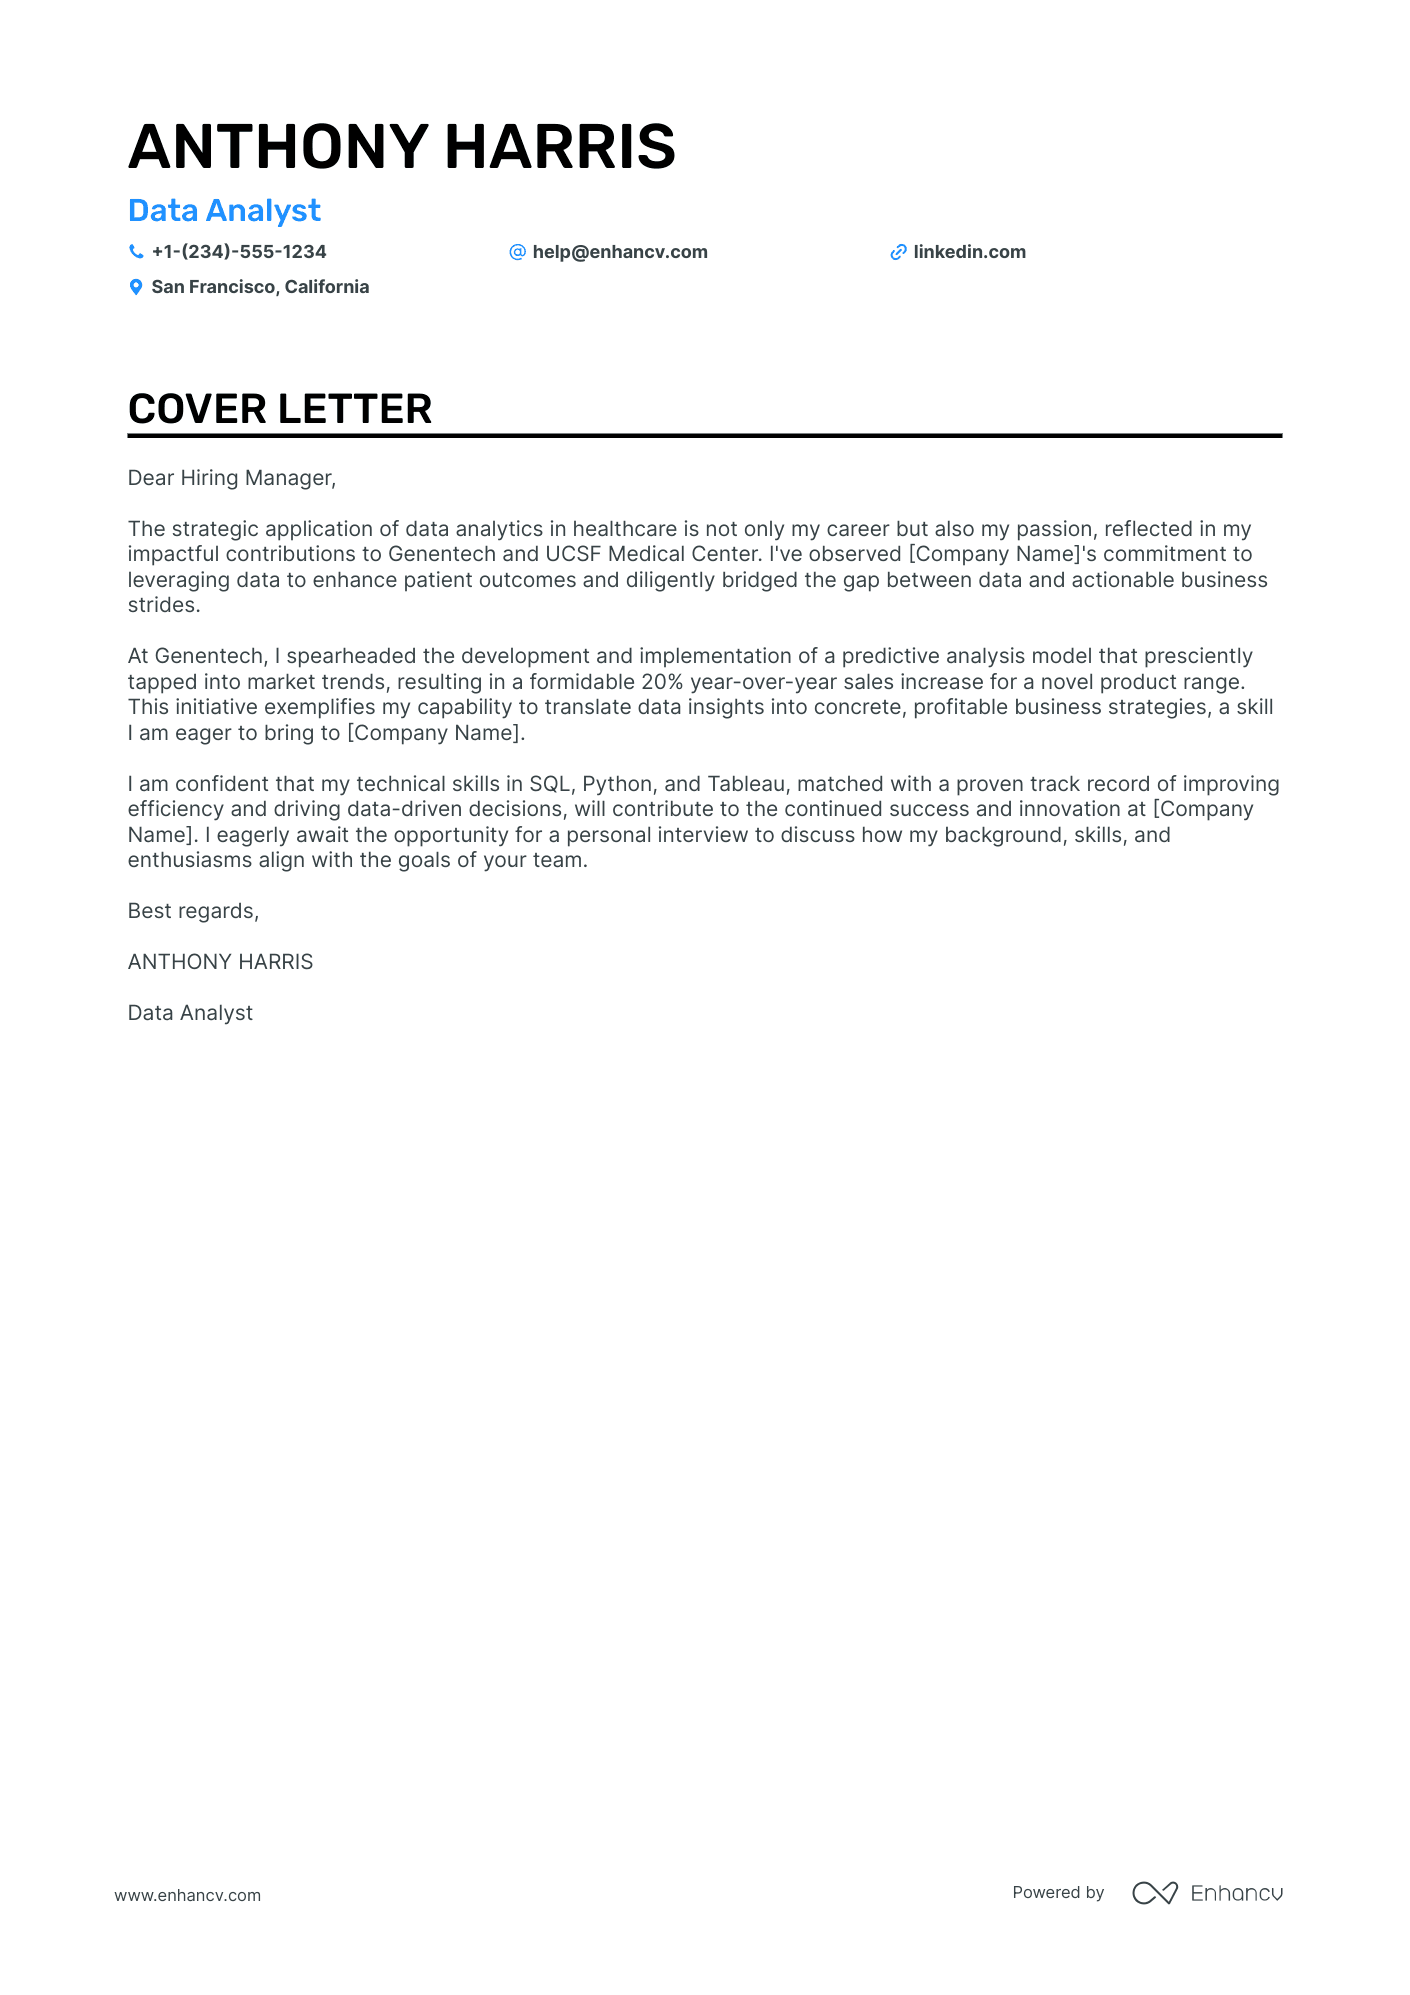 engineering job cover letter examples